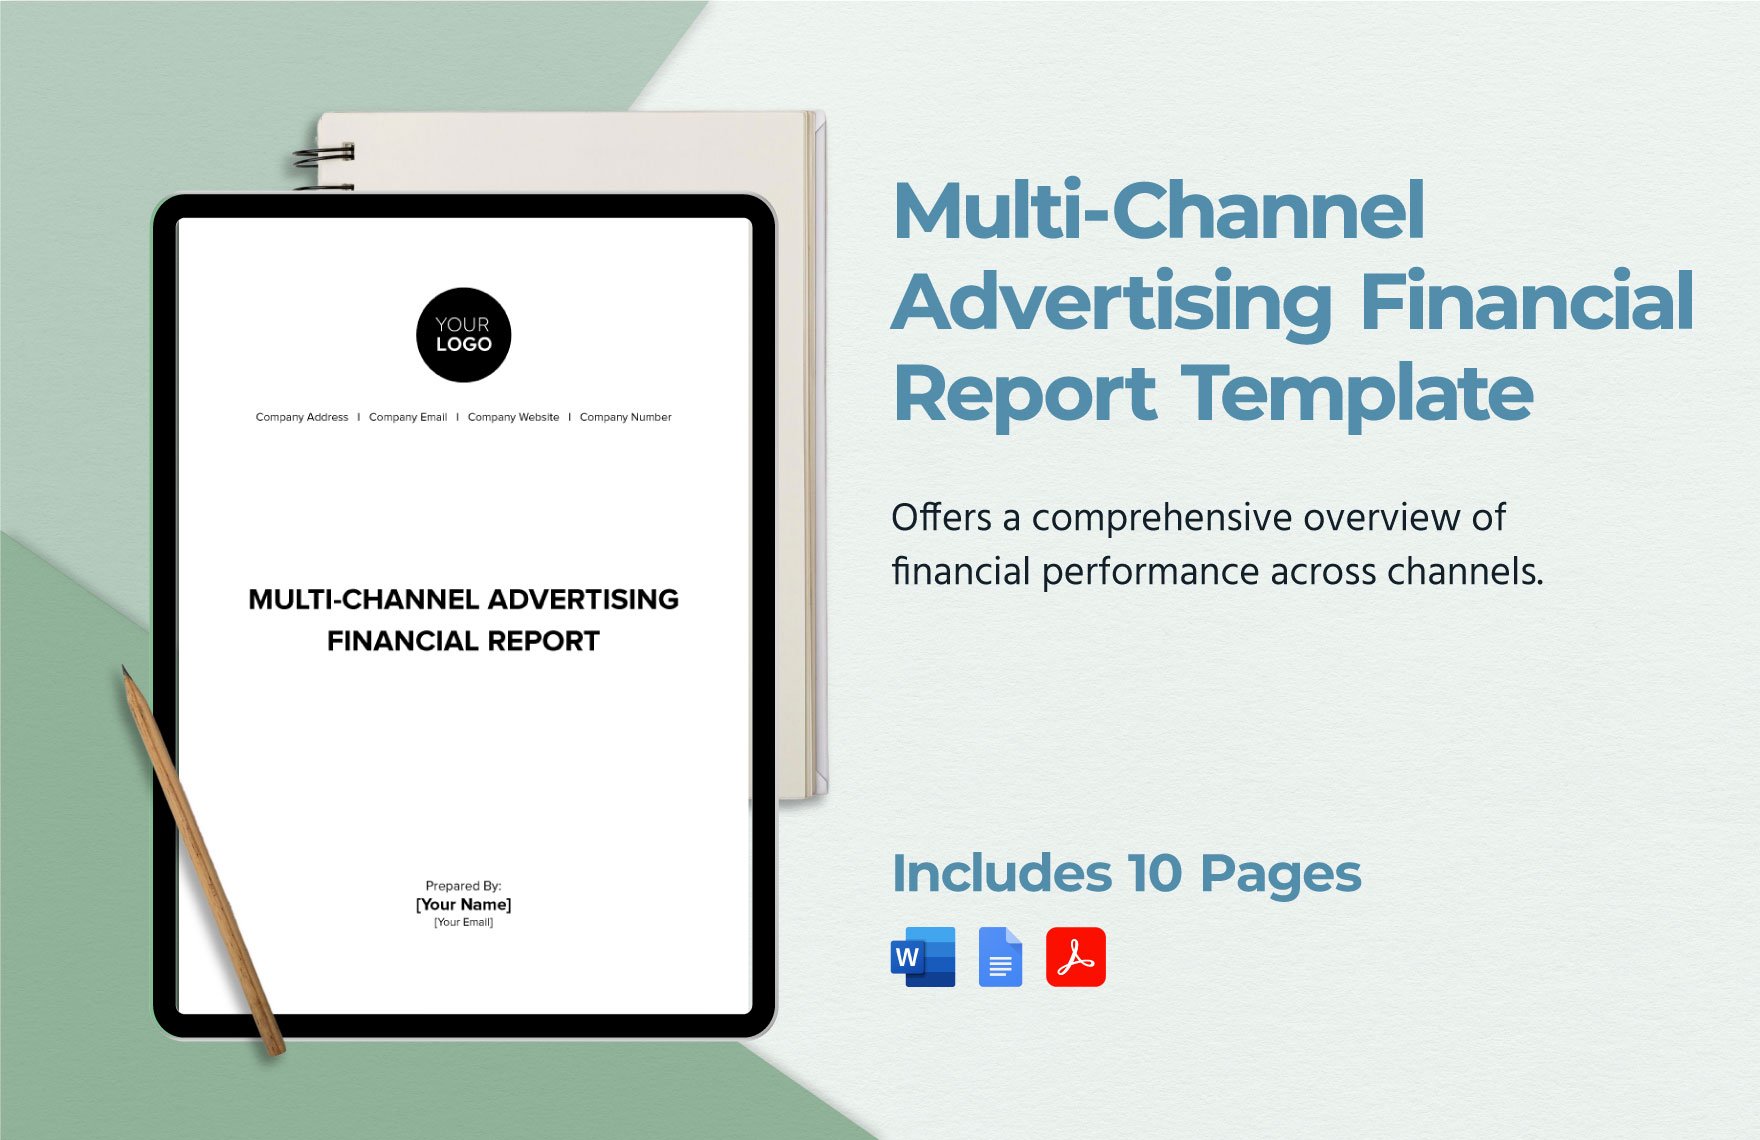 Multi-Channel Advertising Financial Report Template